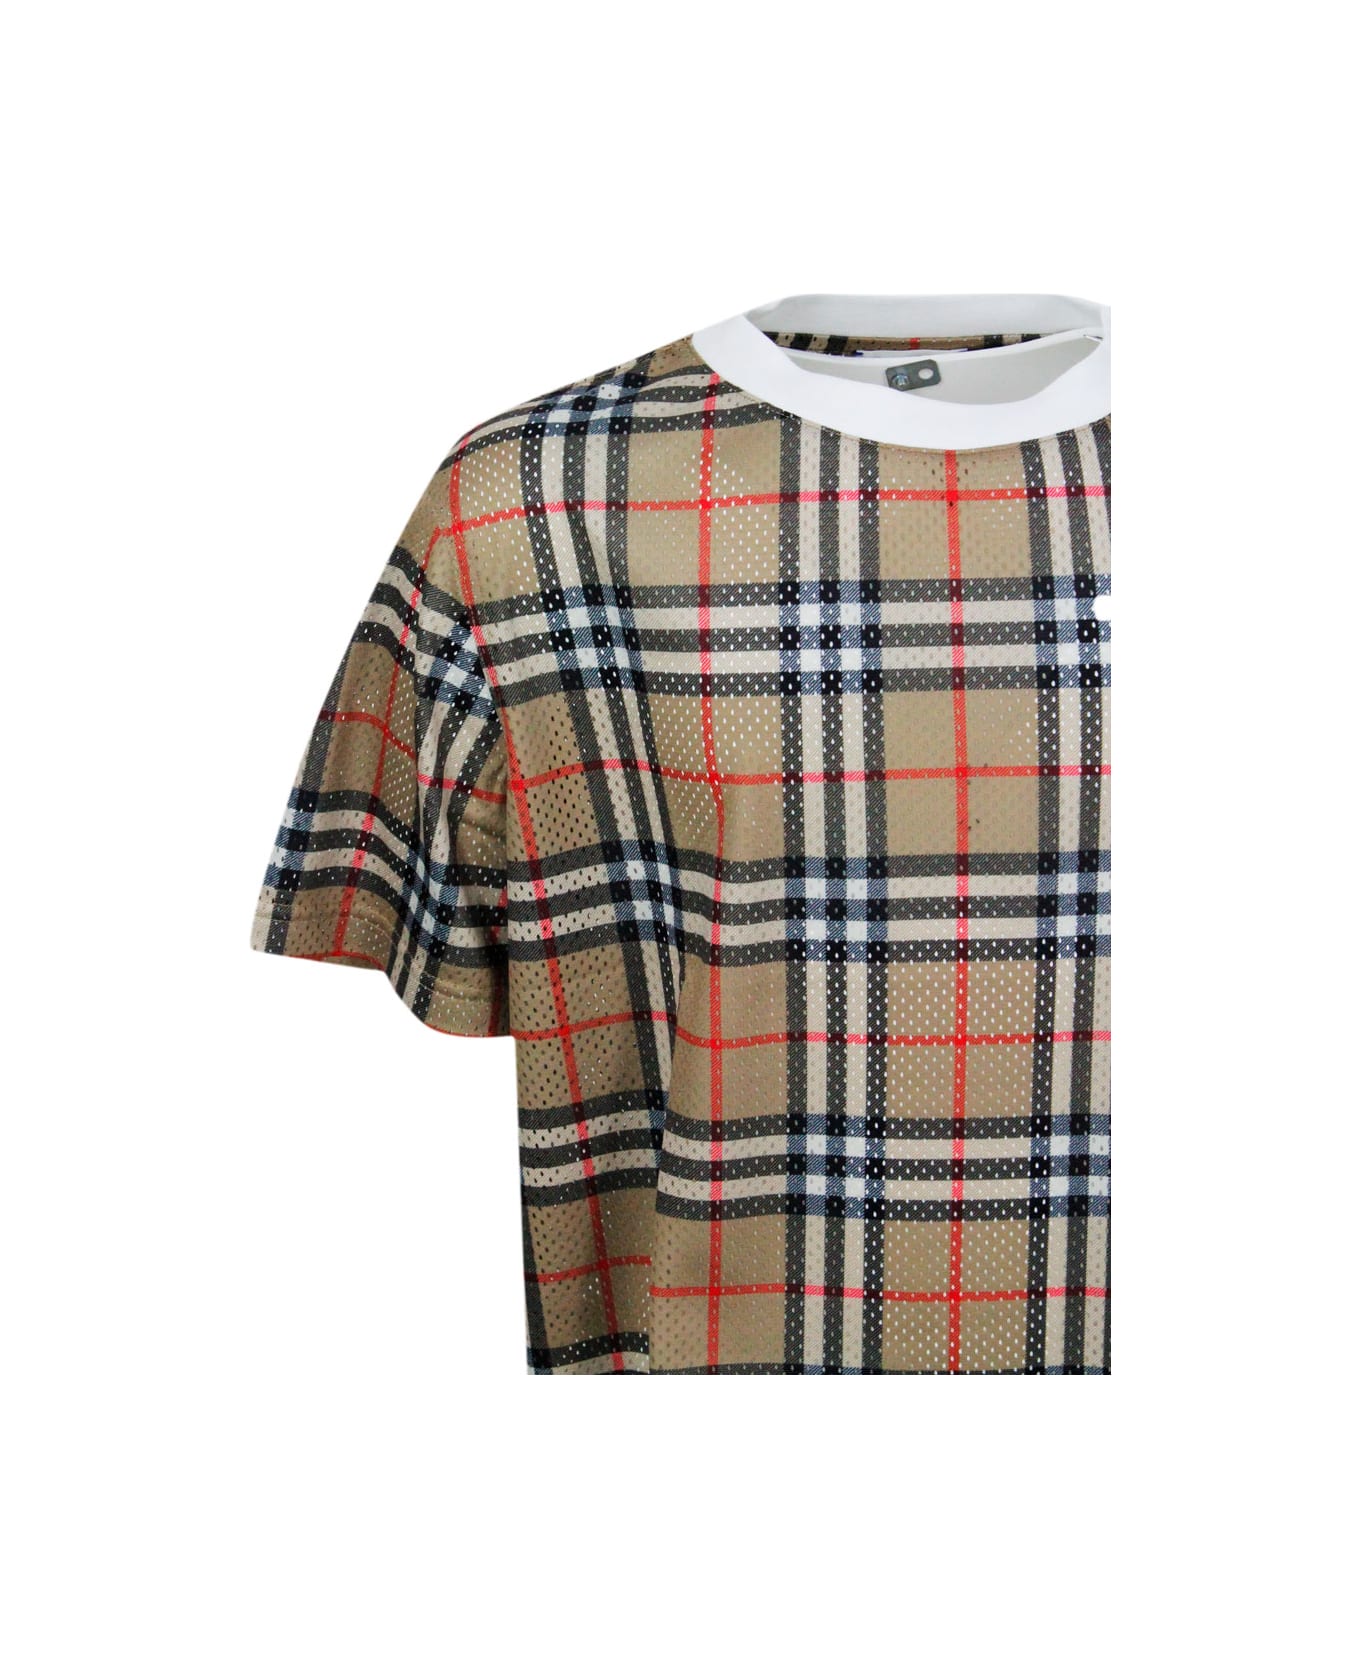 Burberry Crew-neck, Short-sleeved T-shirt In Perforated Fabric With Chekc Motif. - Beige